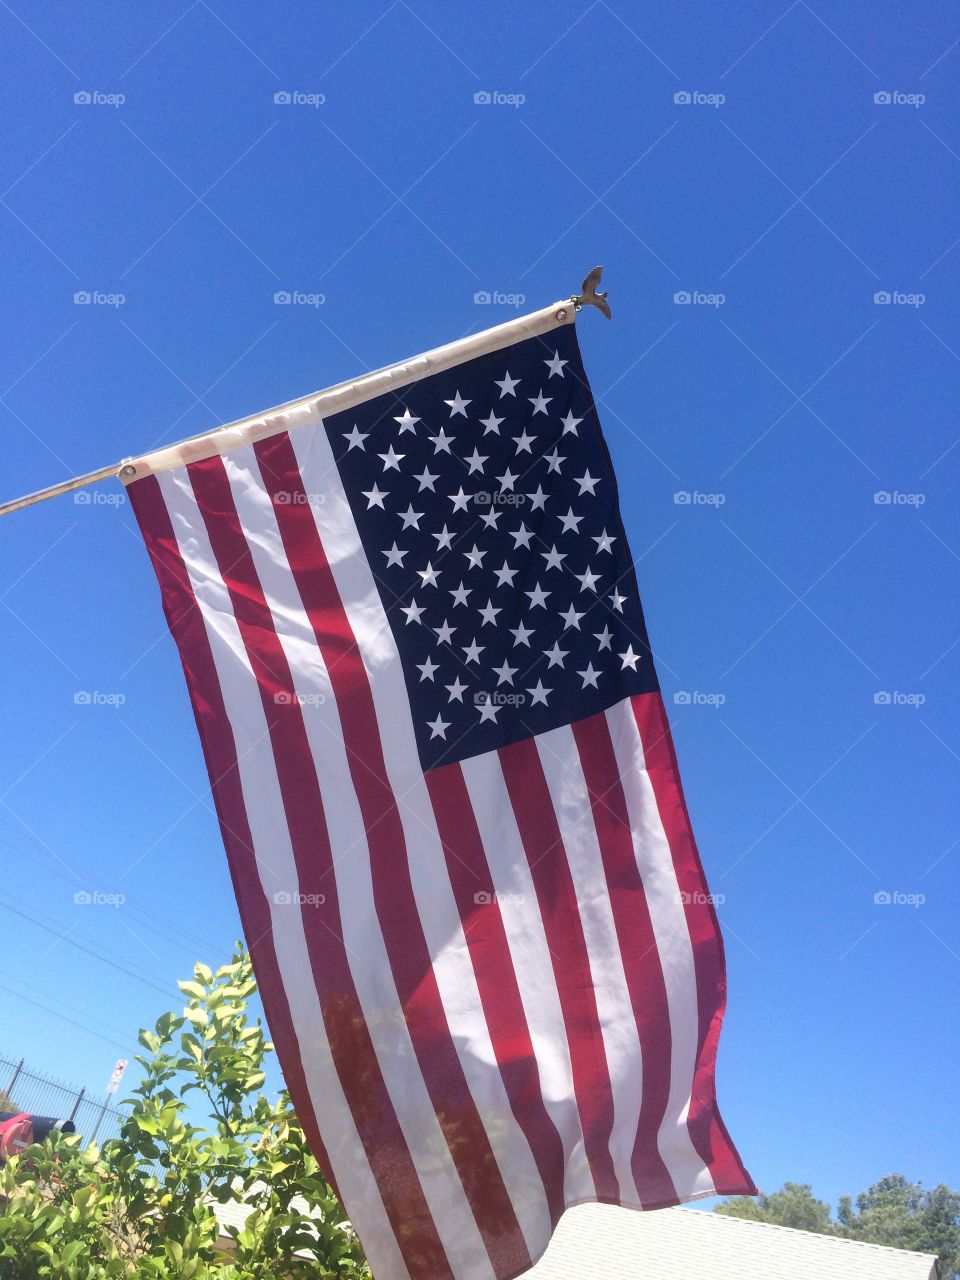 Flying high and proud. American flag flying